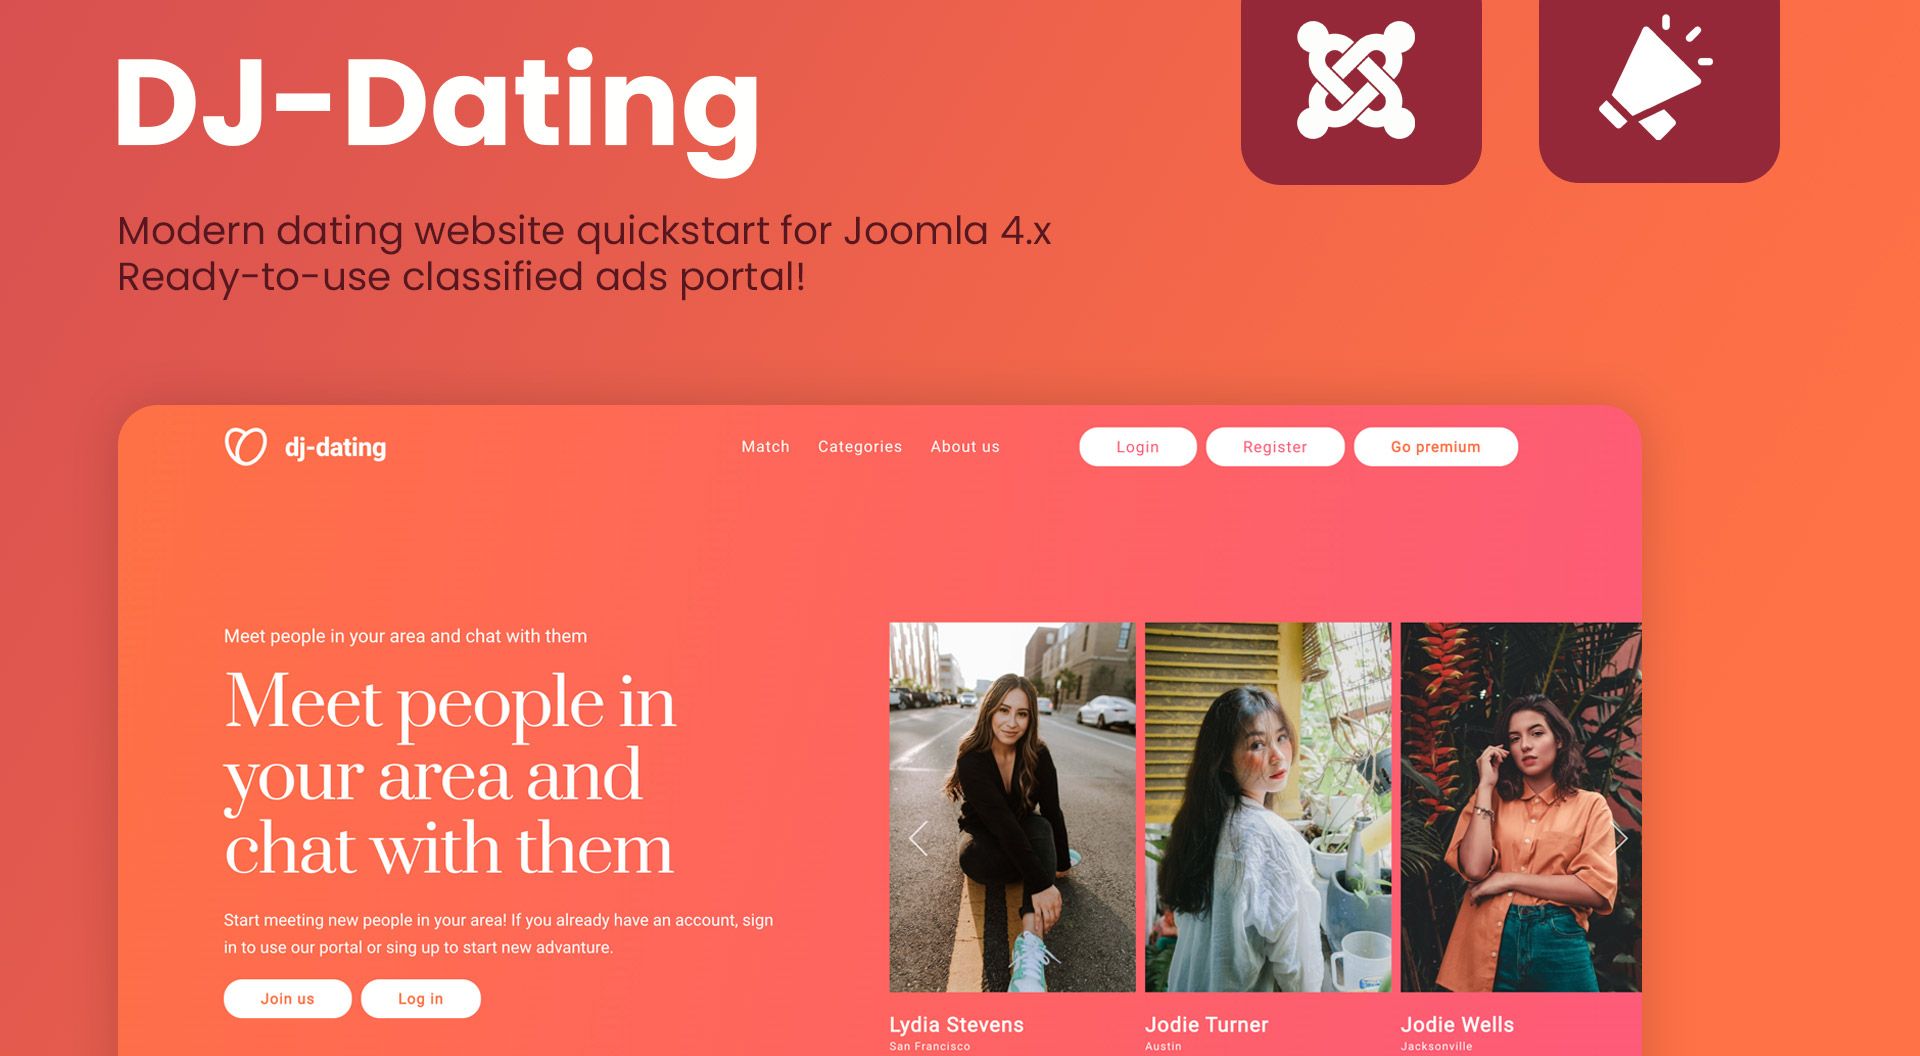 Discover DJ-Dating - Joomla 4.x dating template for classified ads portal